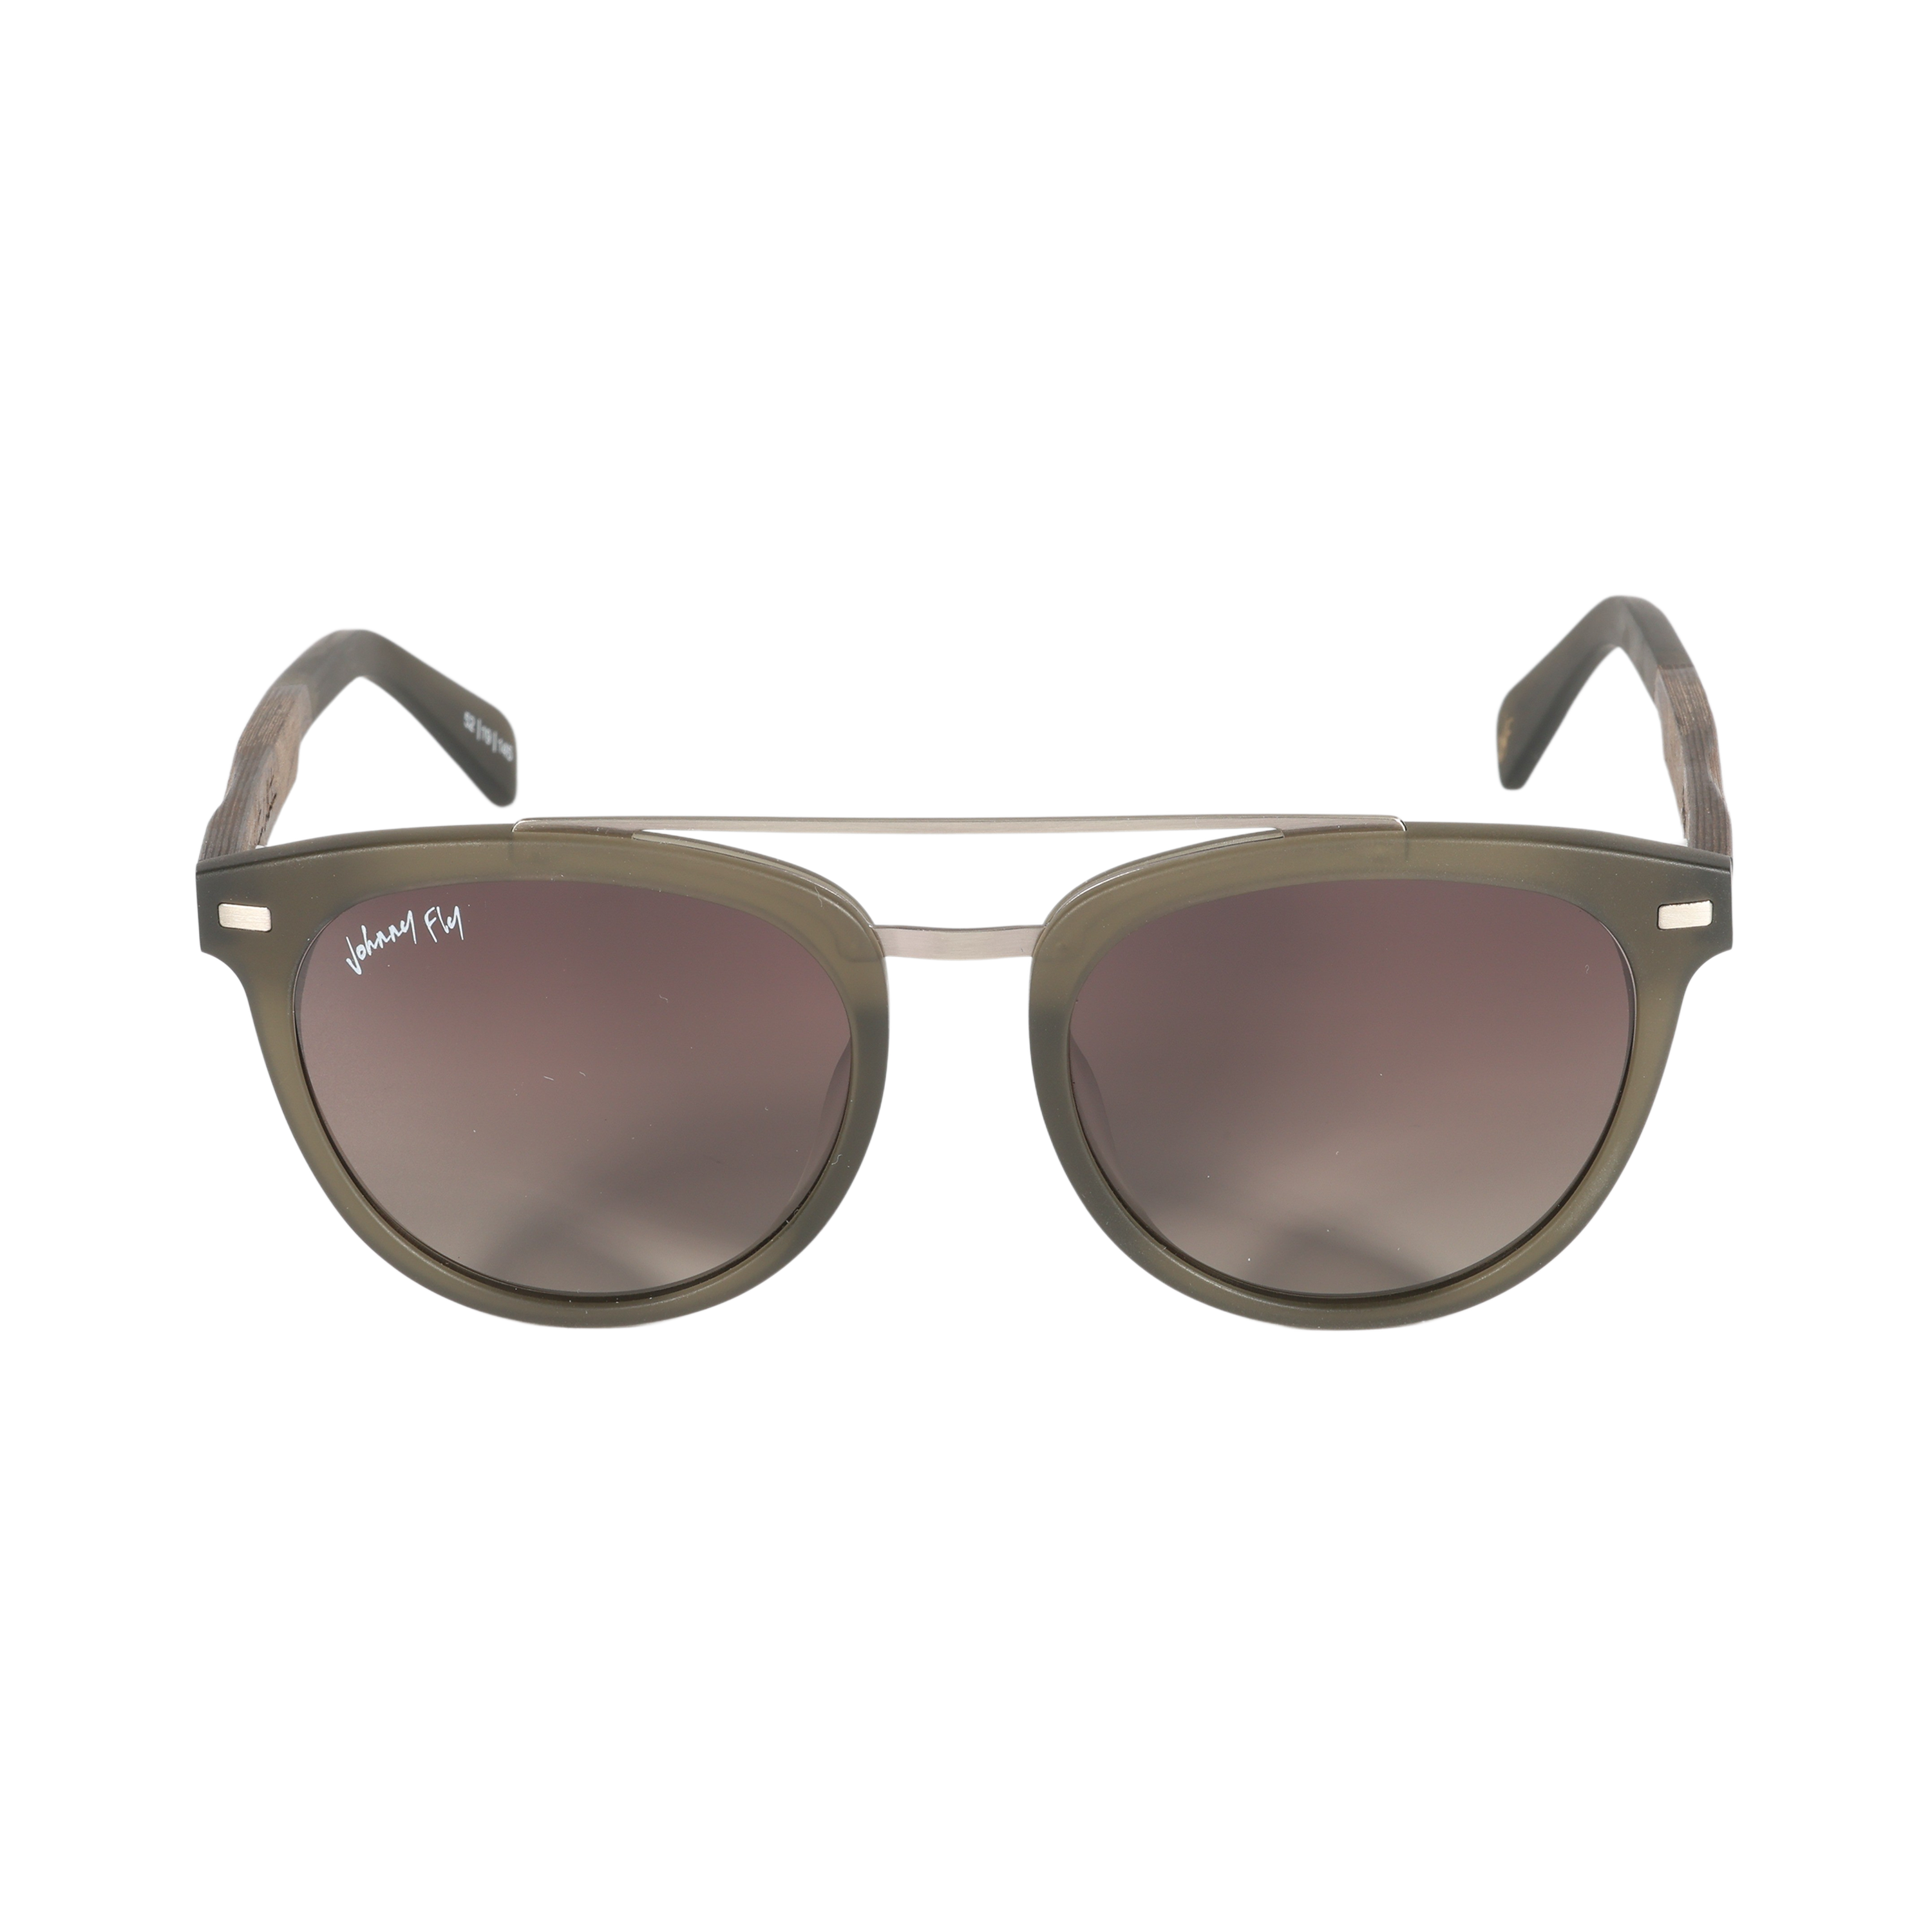 Captain SANDED OLIVE Crossbar Aviator Polarized Sunglasses by Johnny Fly | Handcrafted with Acetate and Wood  